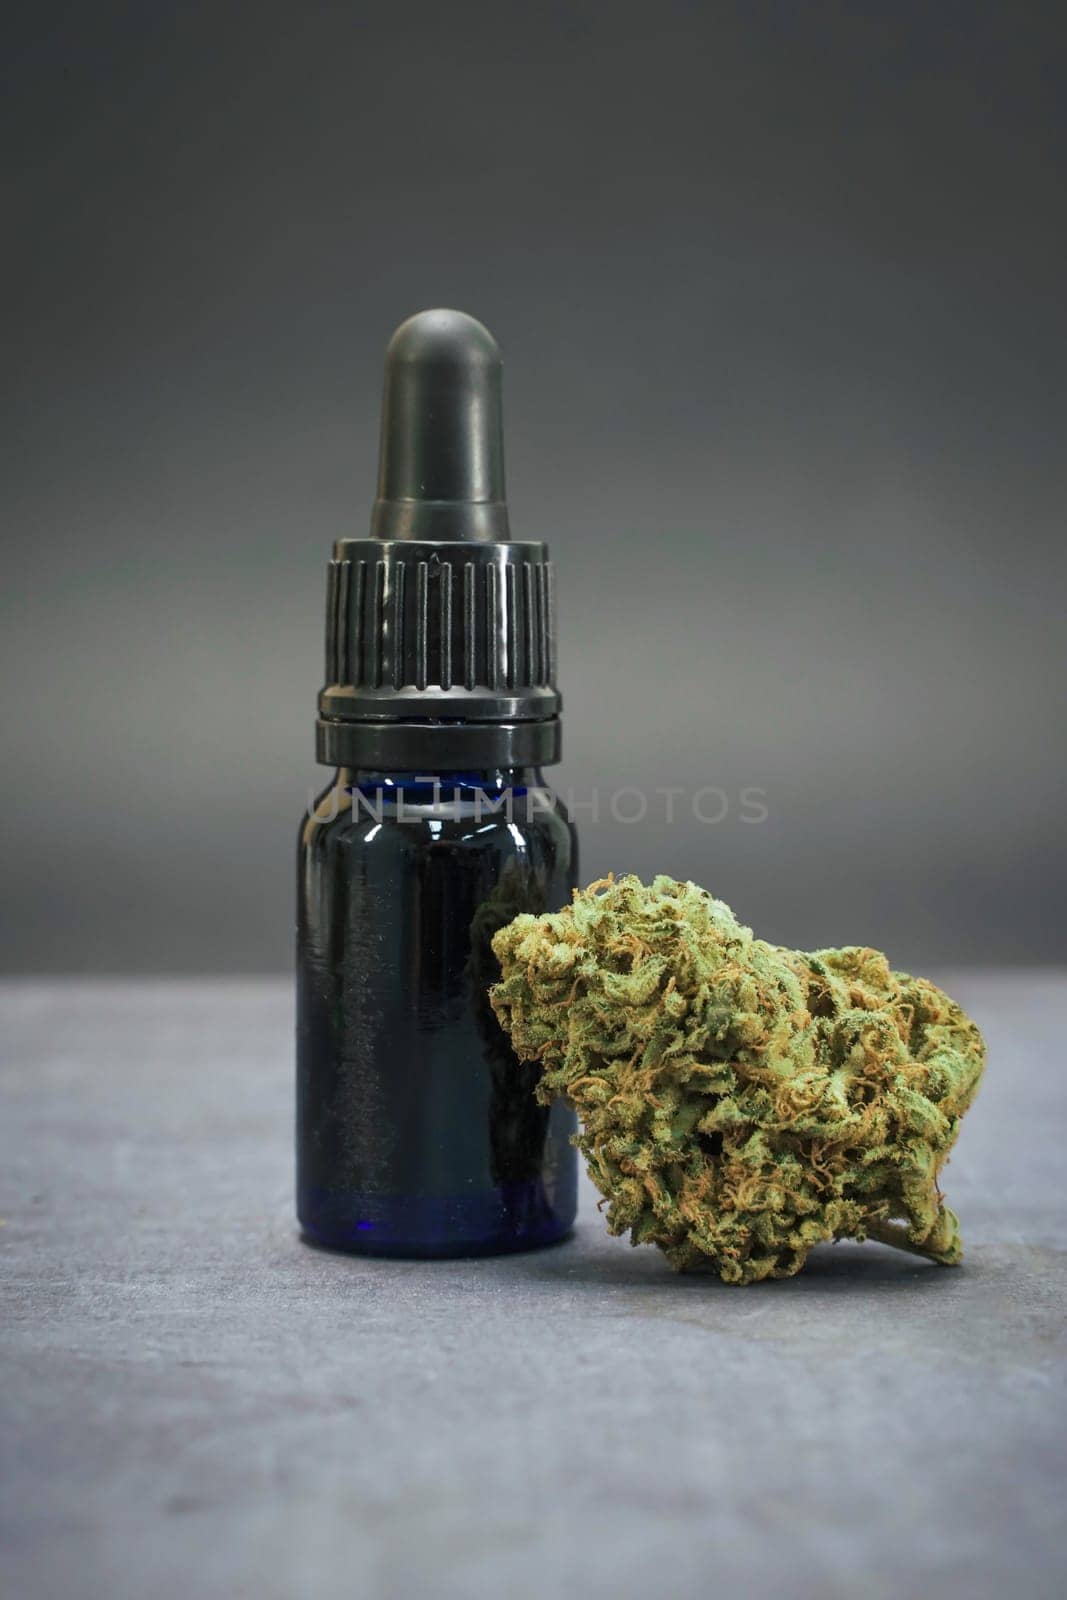 CBD medical marijuana. Organic and natural hemp-based cosmetic and beauty products. by PaulCarr